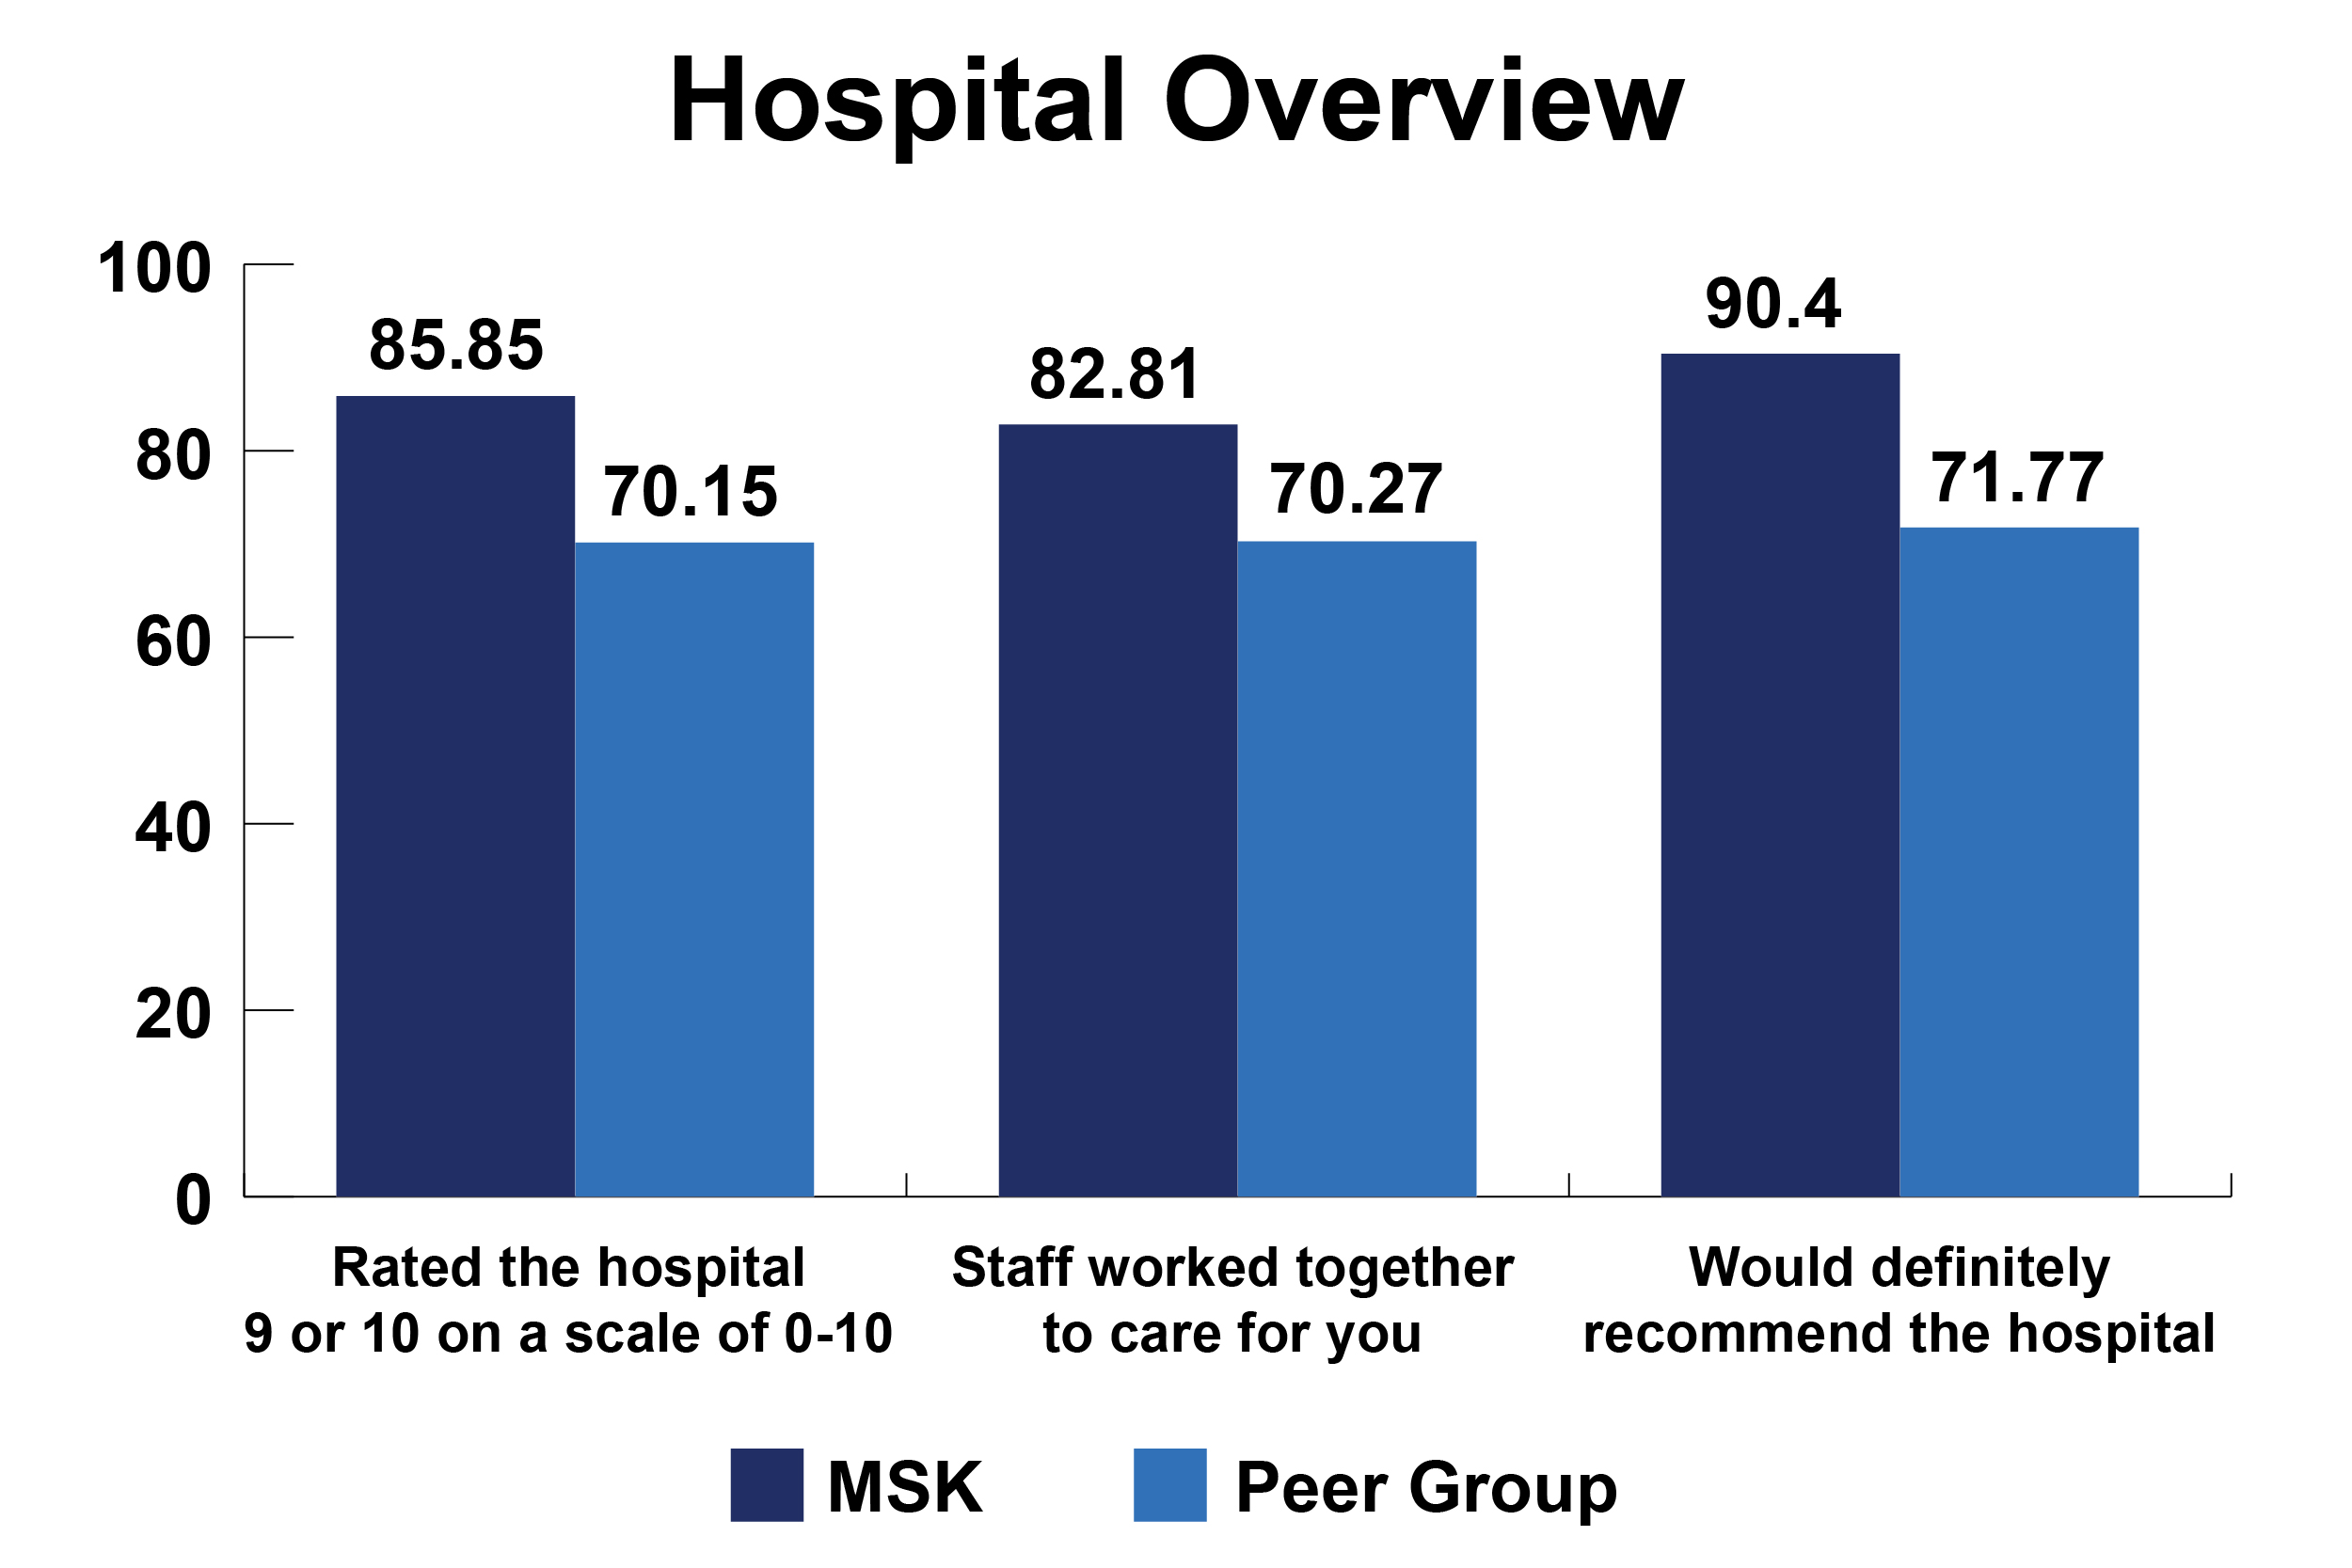 Graph: Hospital Overview (Inpatients)